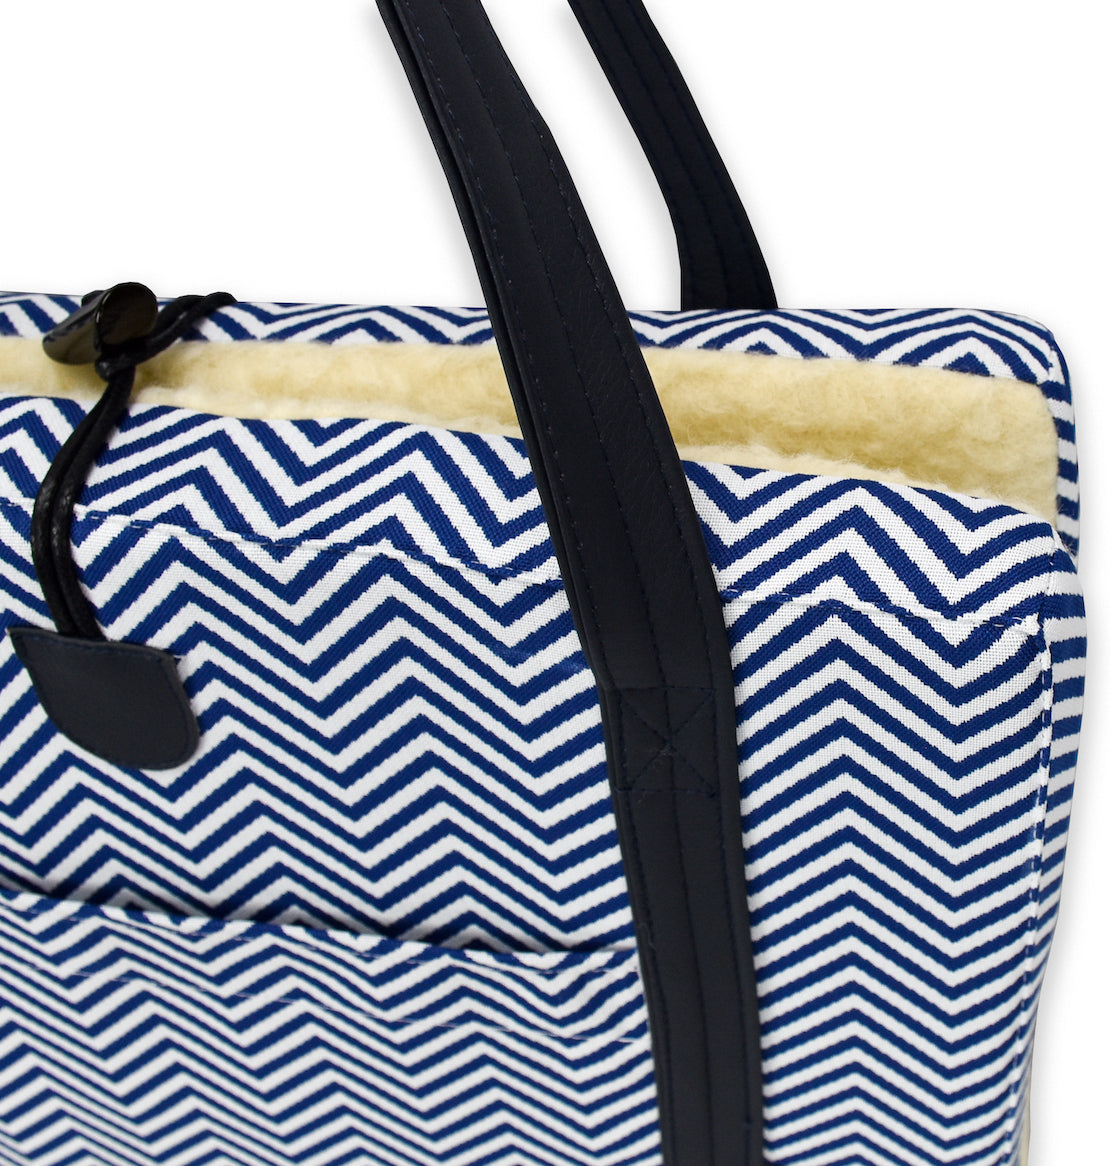 Close up of the Premium Chevron exterior upholstry fabric on the KONA CAVE® Travel Dog Bed in navy blue and white